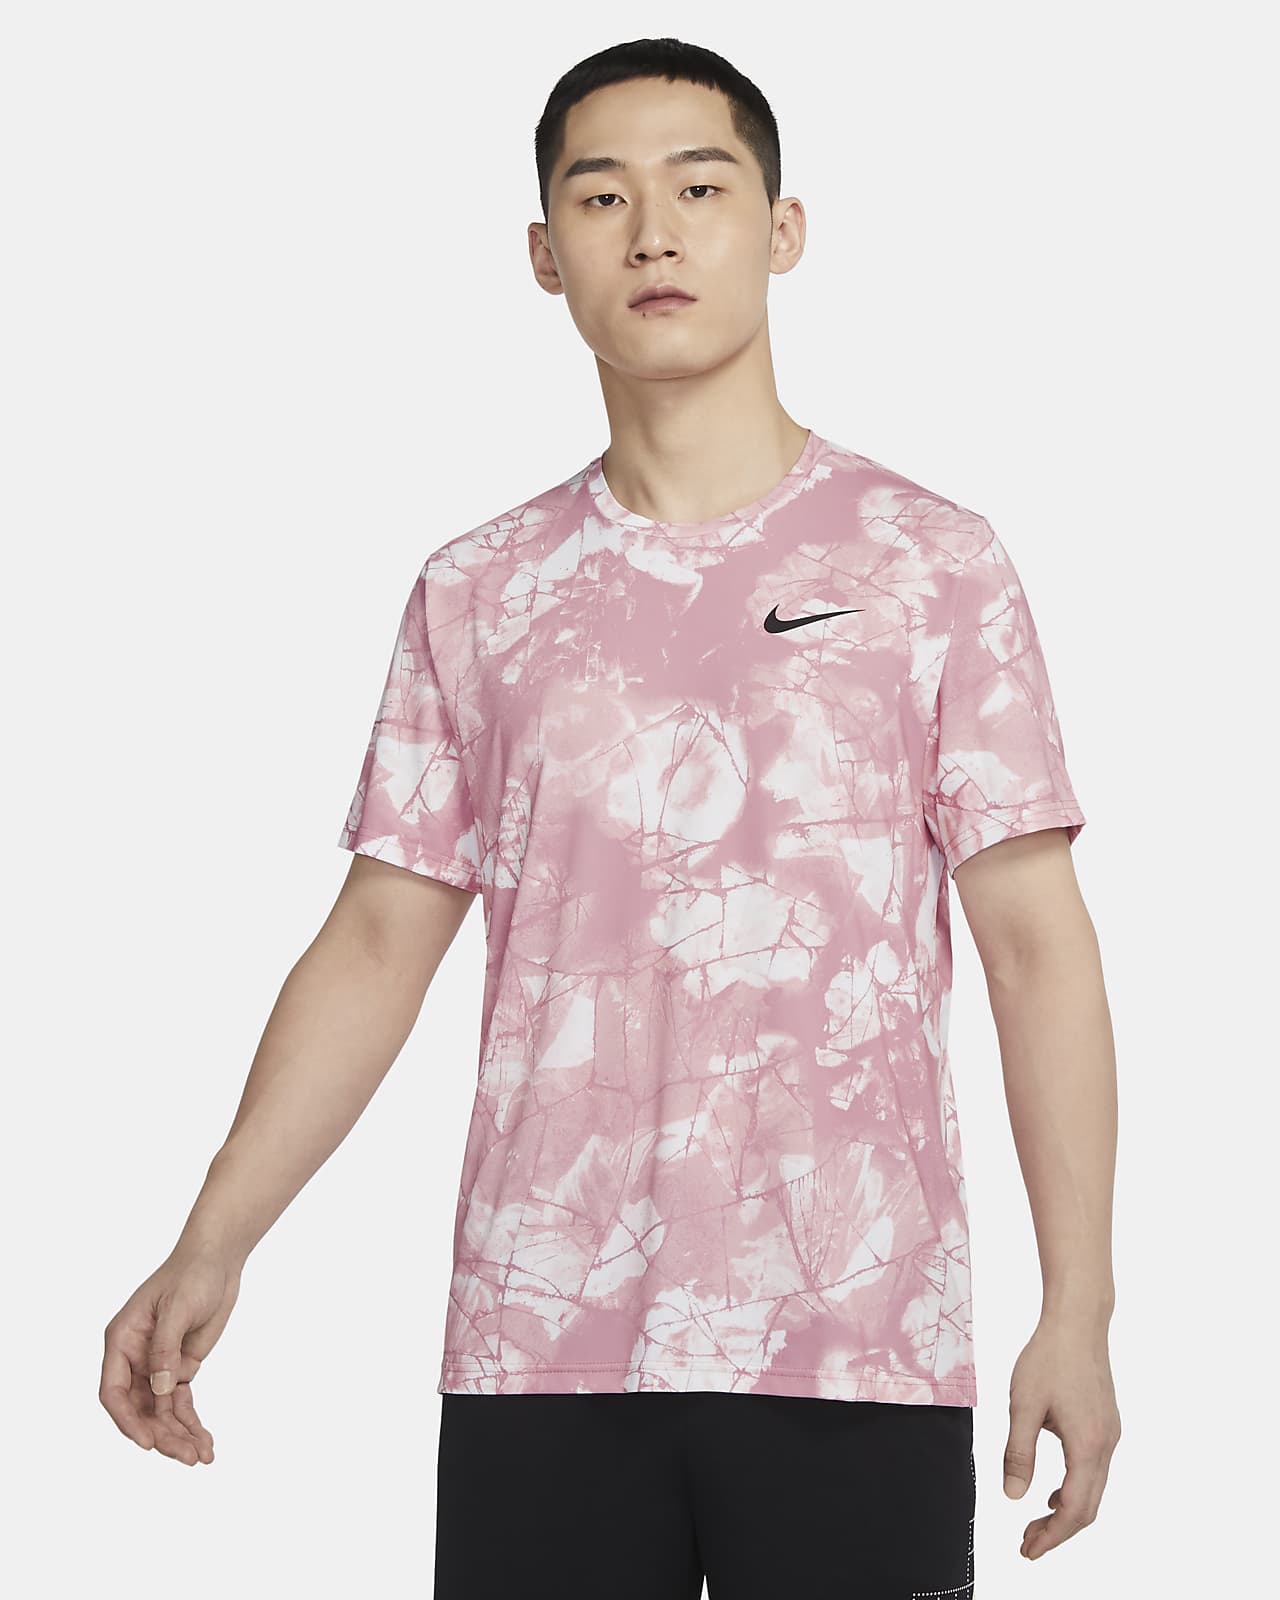 Nike Pro Dri-FIT Men's All-Over Print Short-Sleeve Top